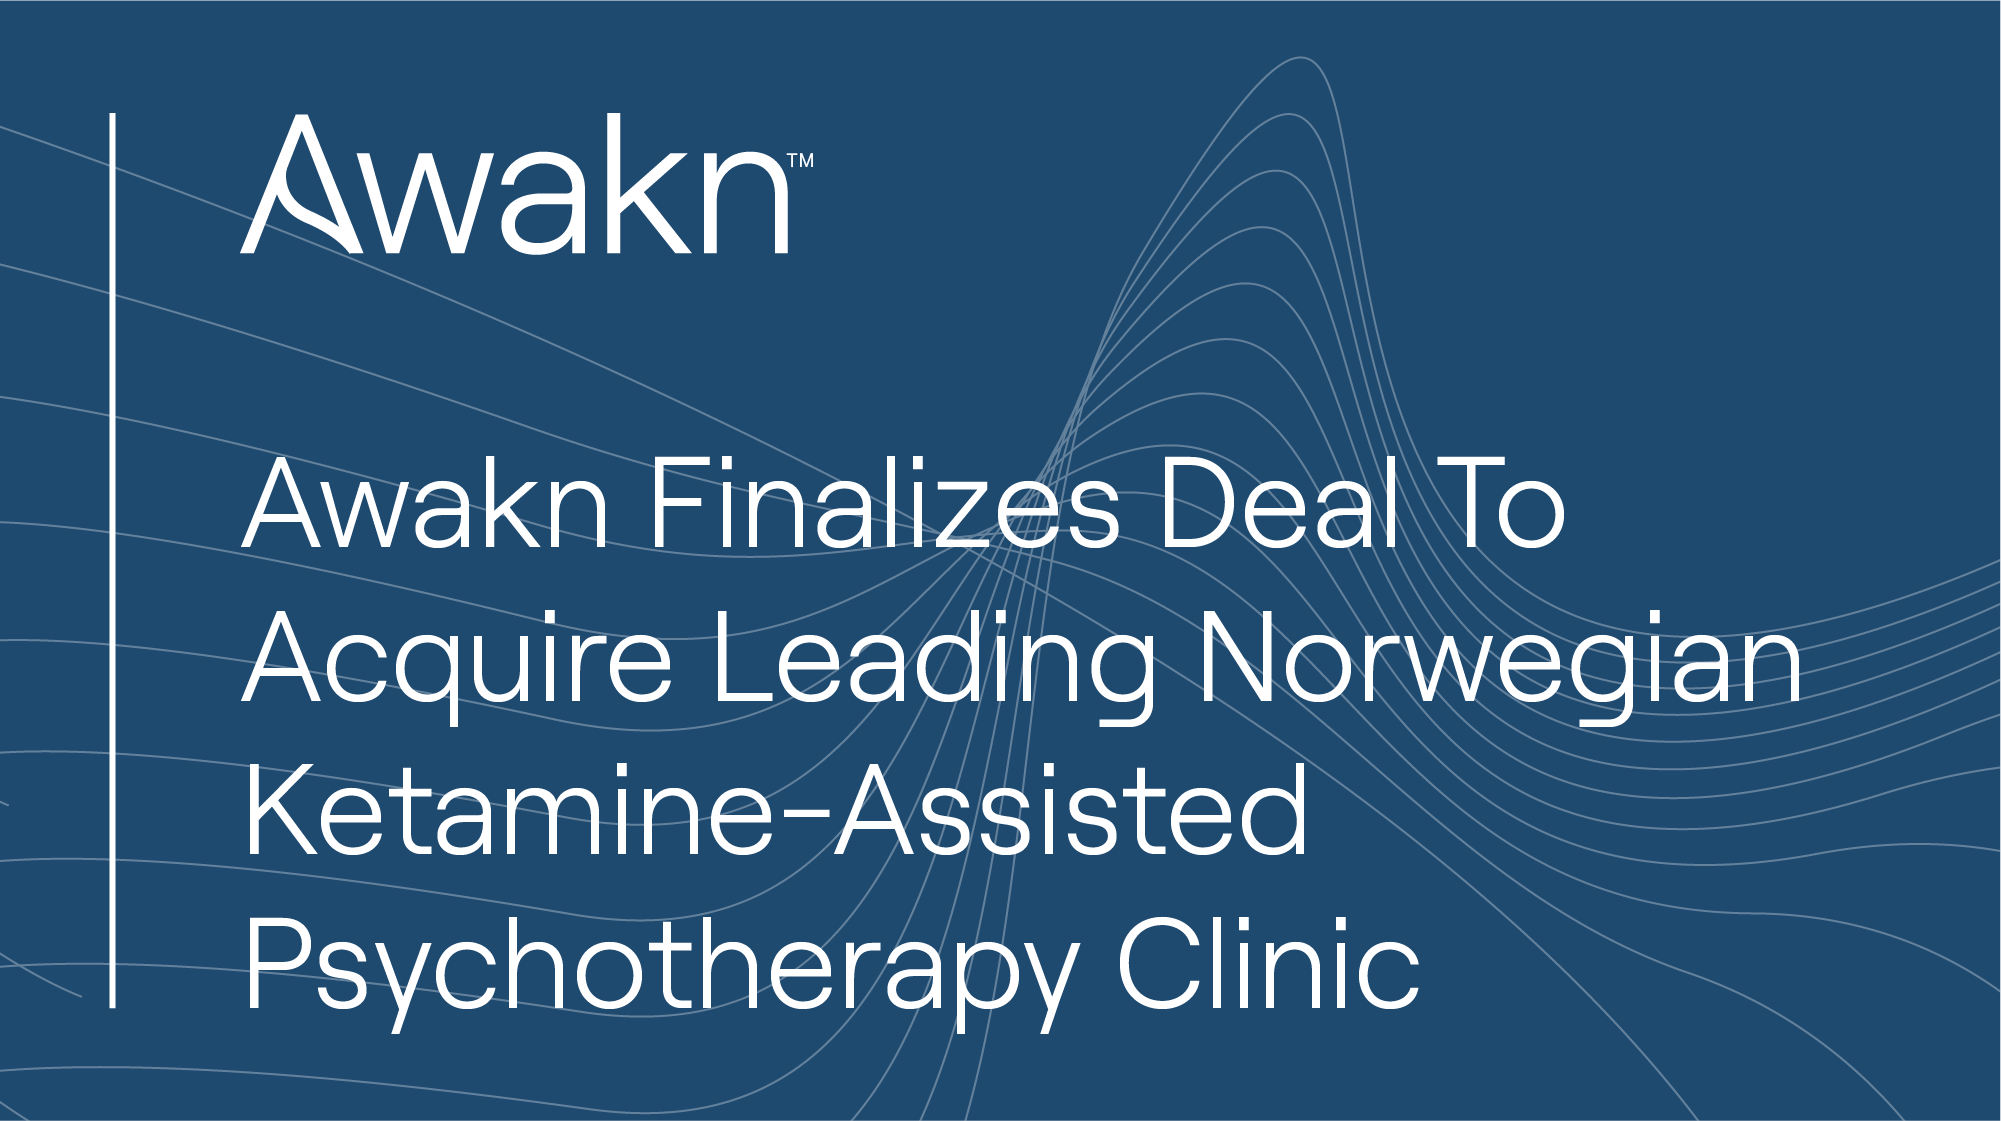 Awakn Finalizes Deal To Acquire Leading Norwegian Ketamine-Assisted Psychotherapy Clinic